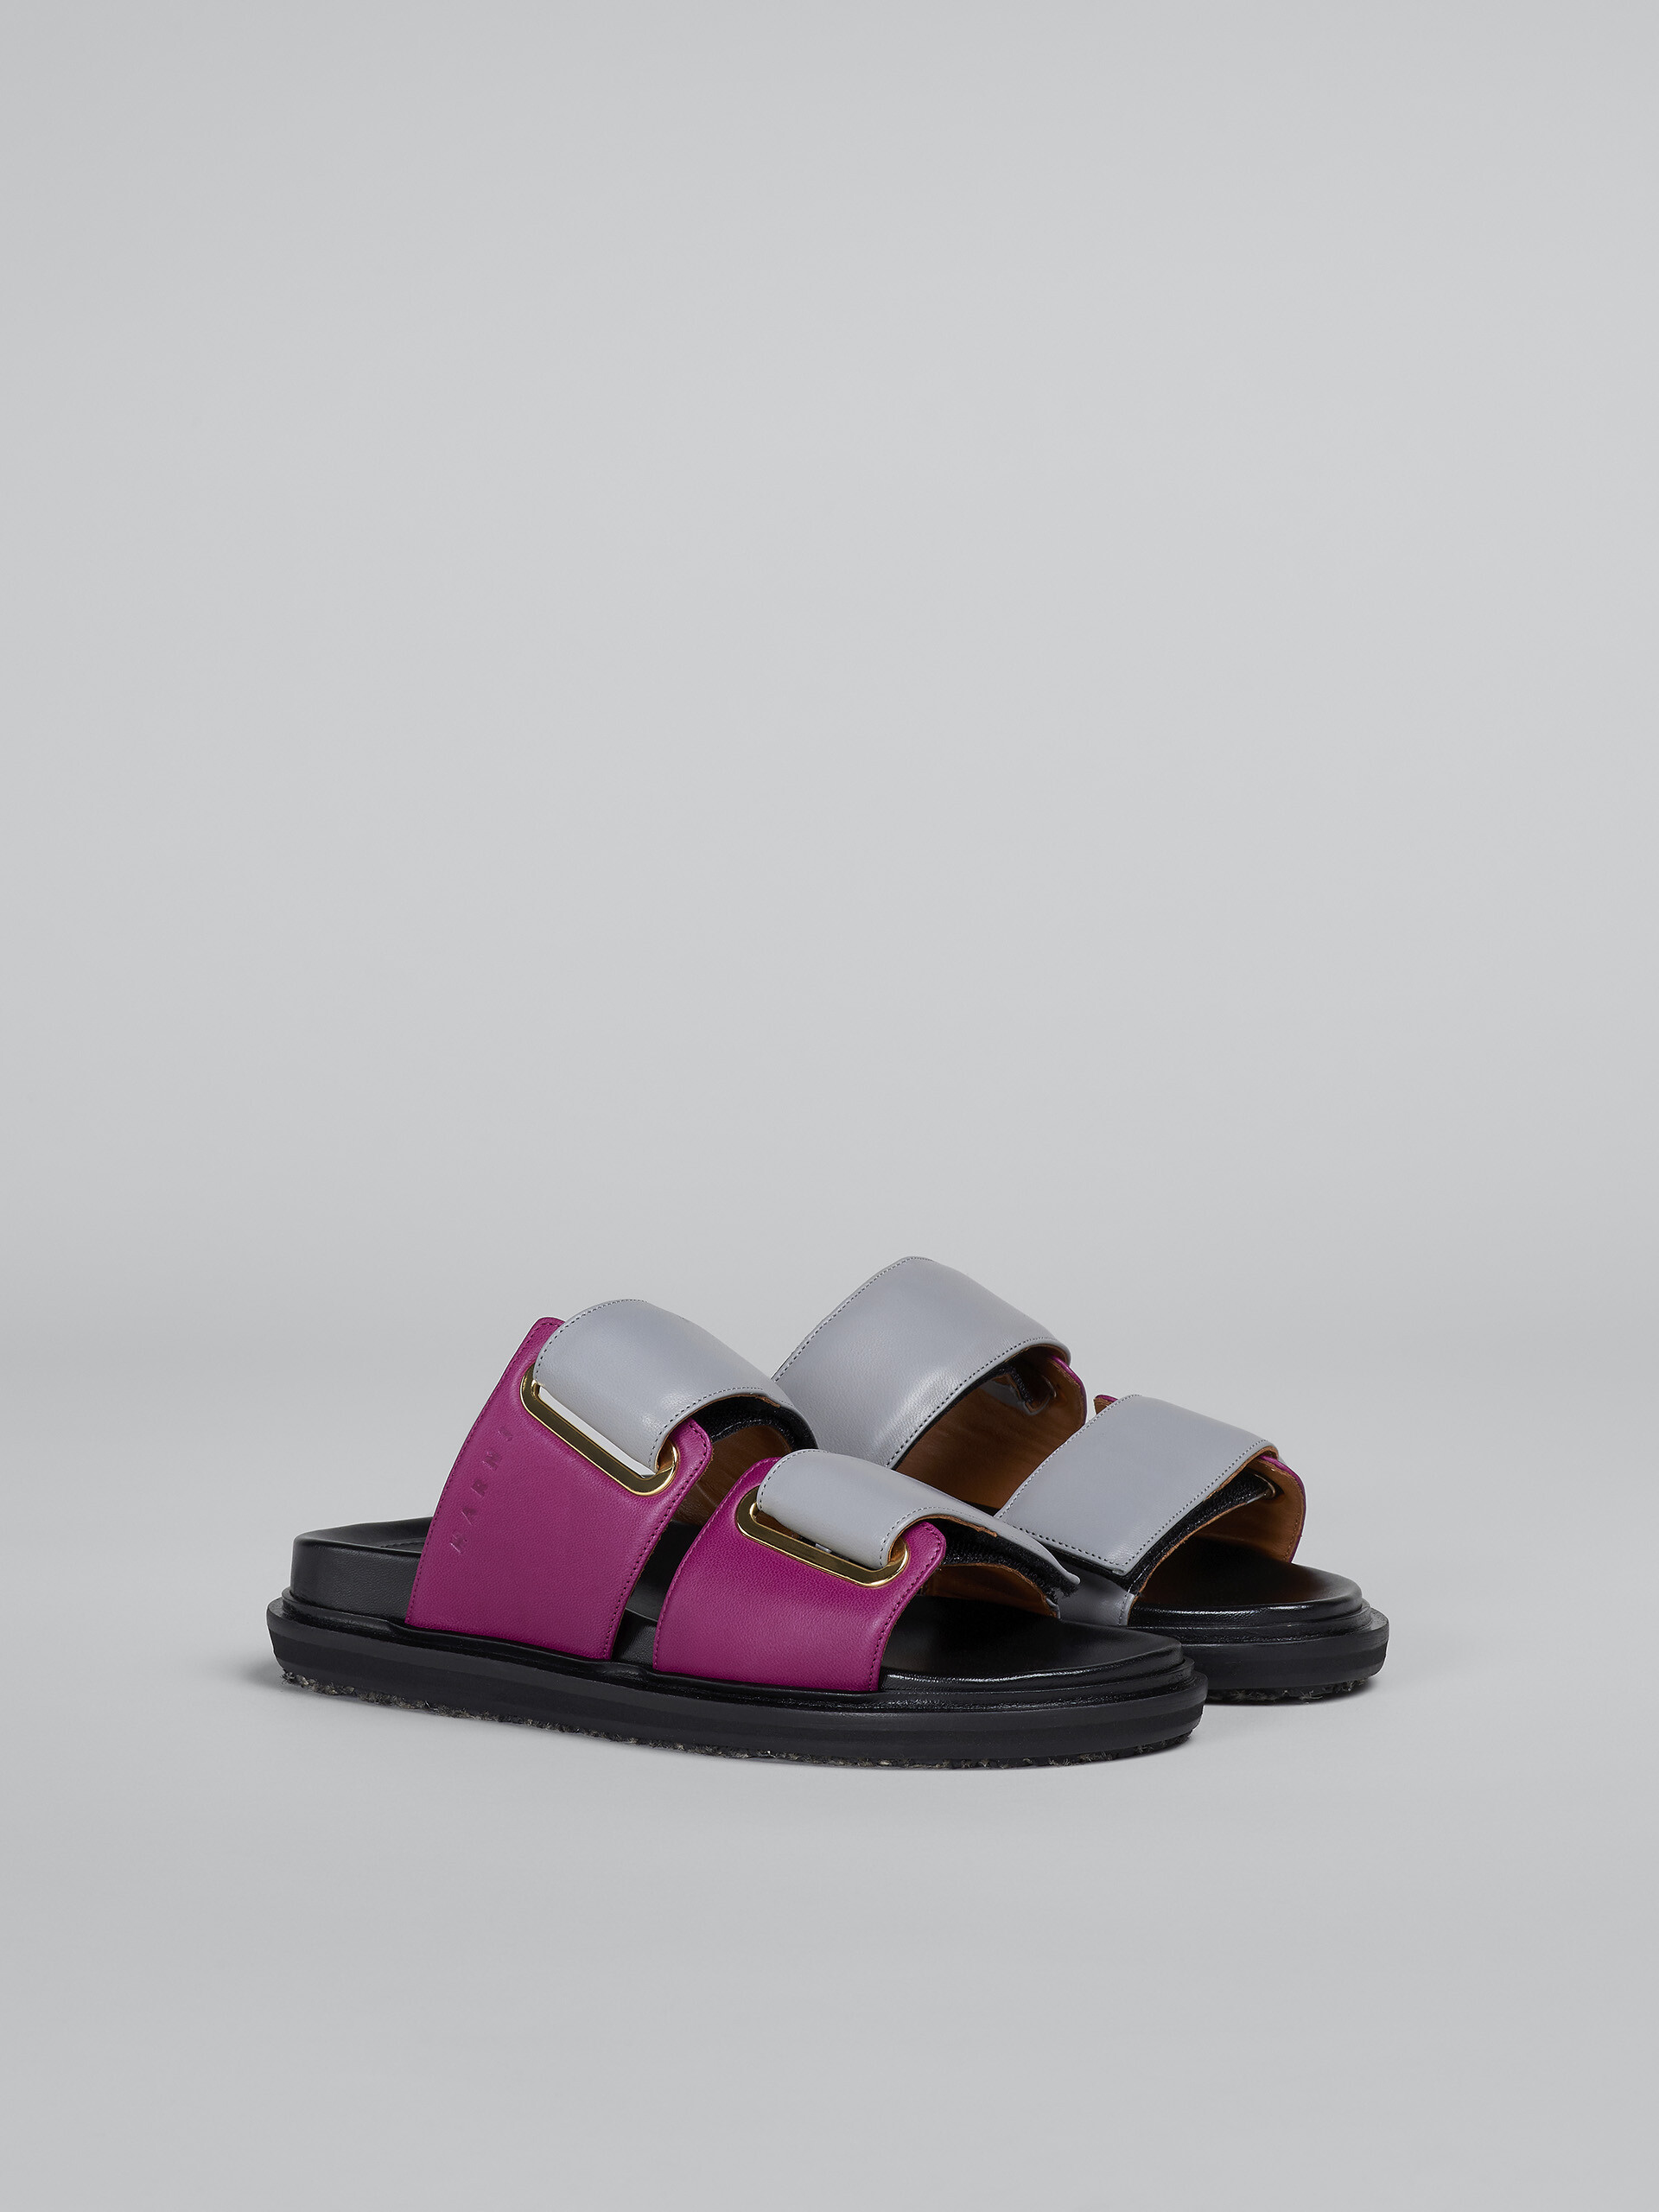 Grey and fucshia leather fussbett - Sandals - Image 2